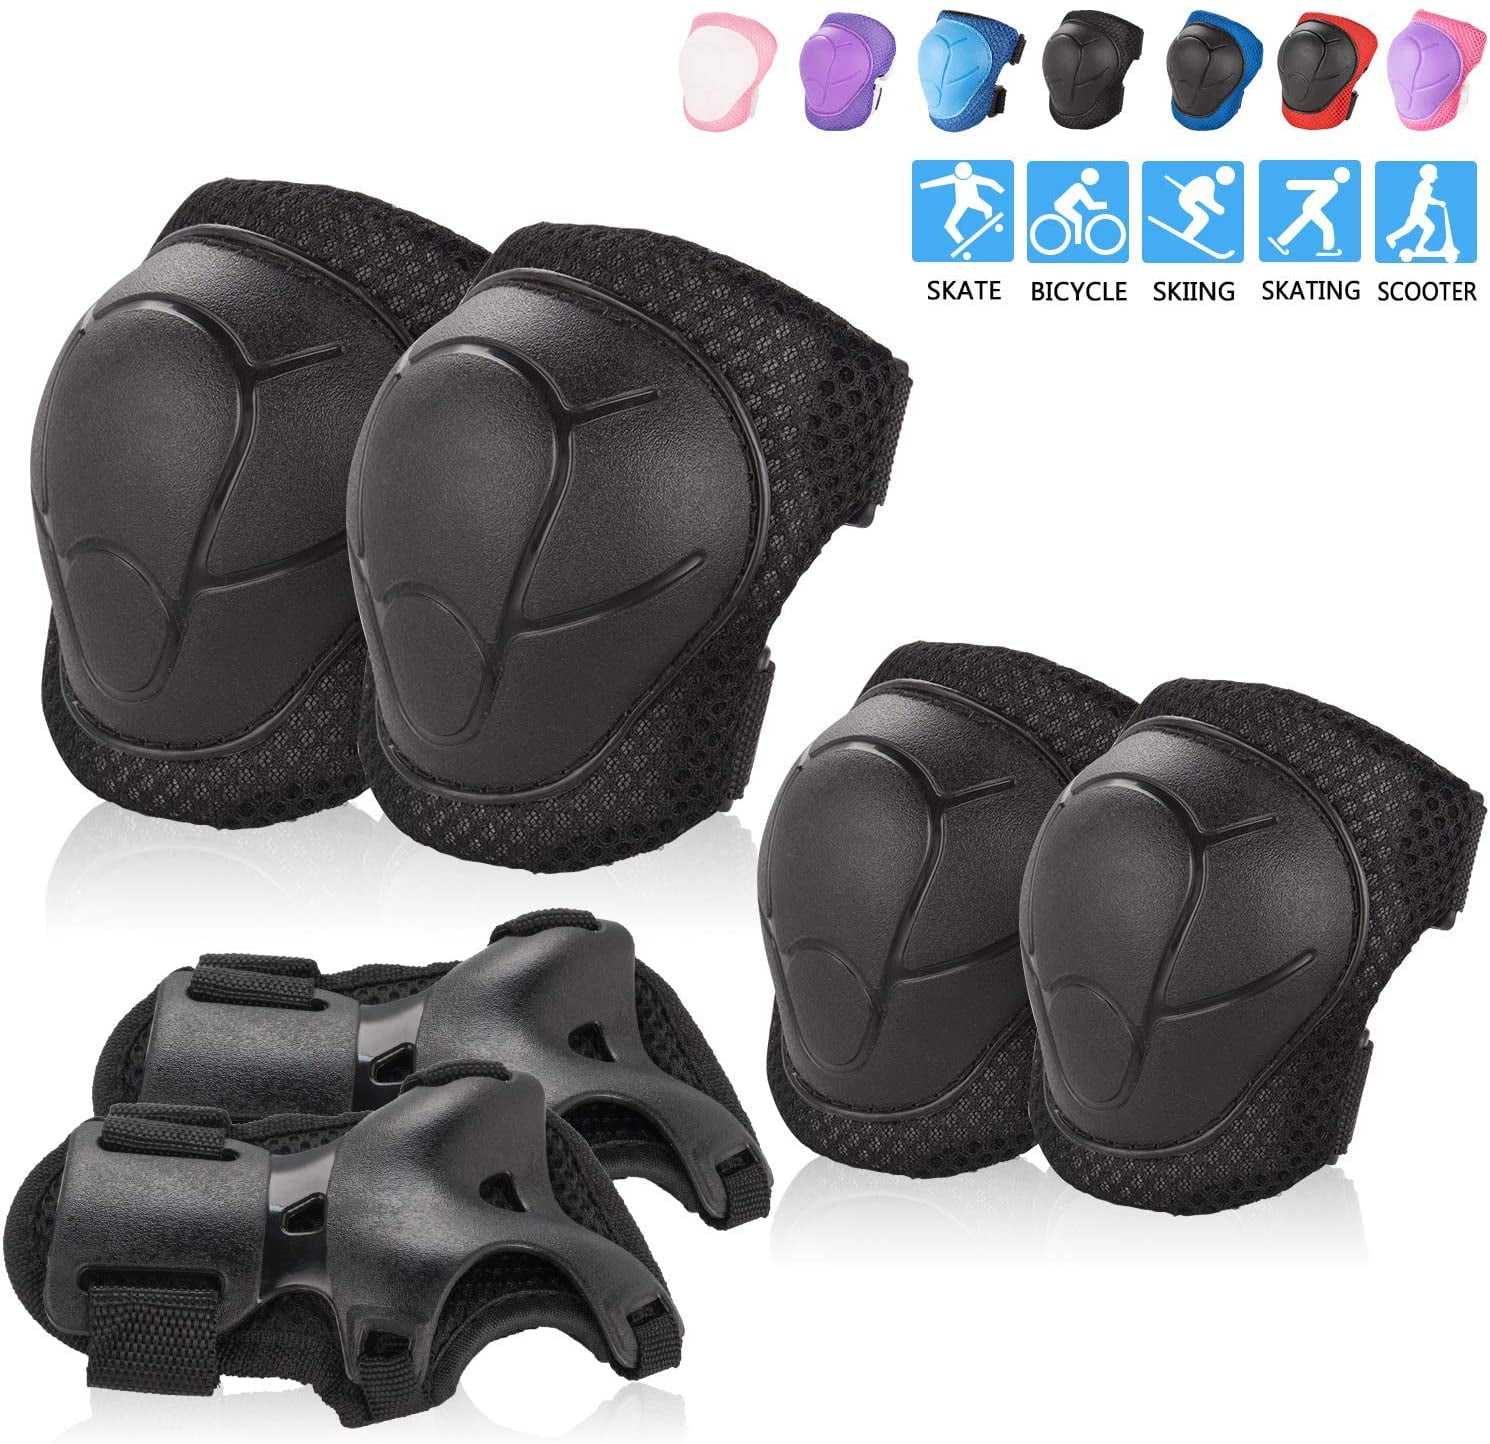 KUYOU Kids Protective Gear Knee Pads Elbow Pads with Wrist Guard for Skateboarding Inline Roller Skating Cycling Biking BMX Ski Scooter 